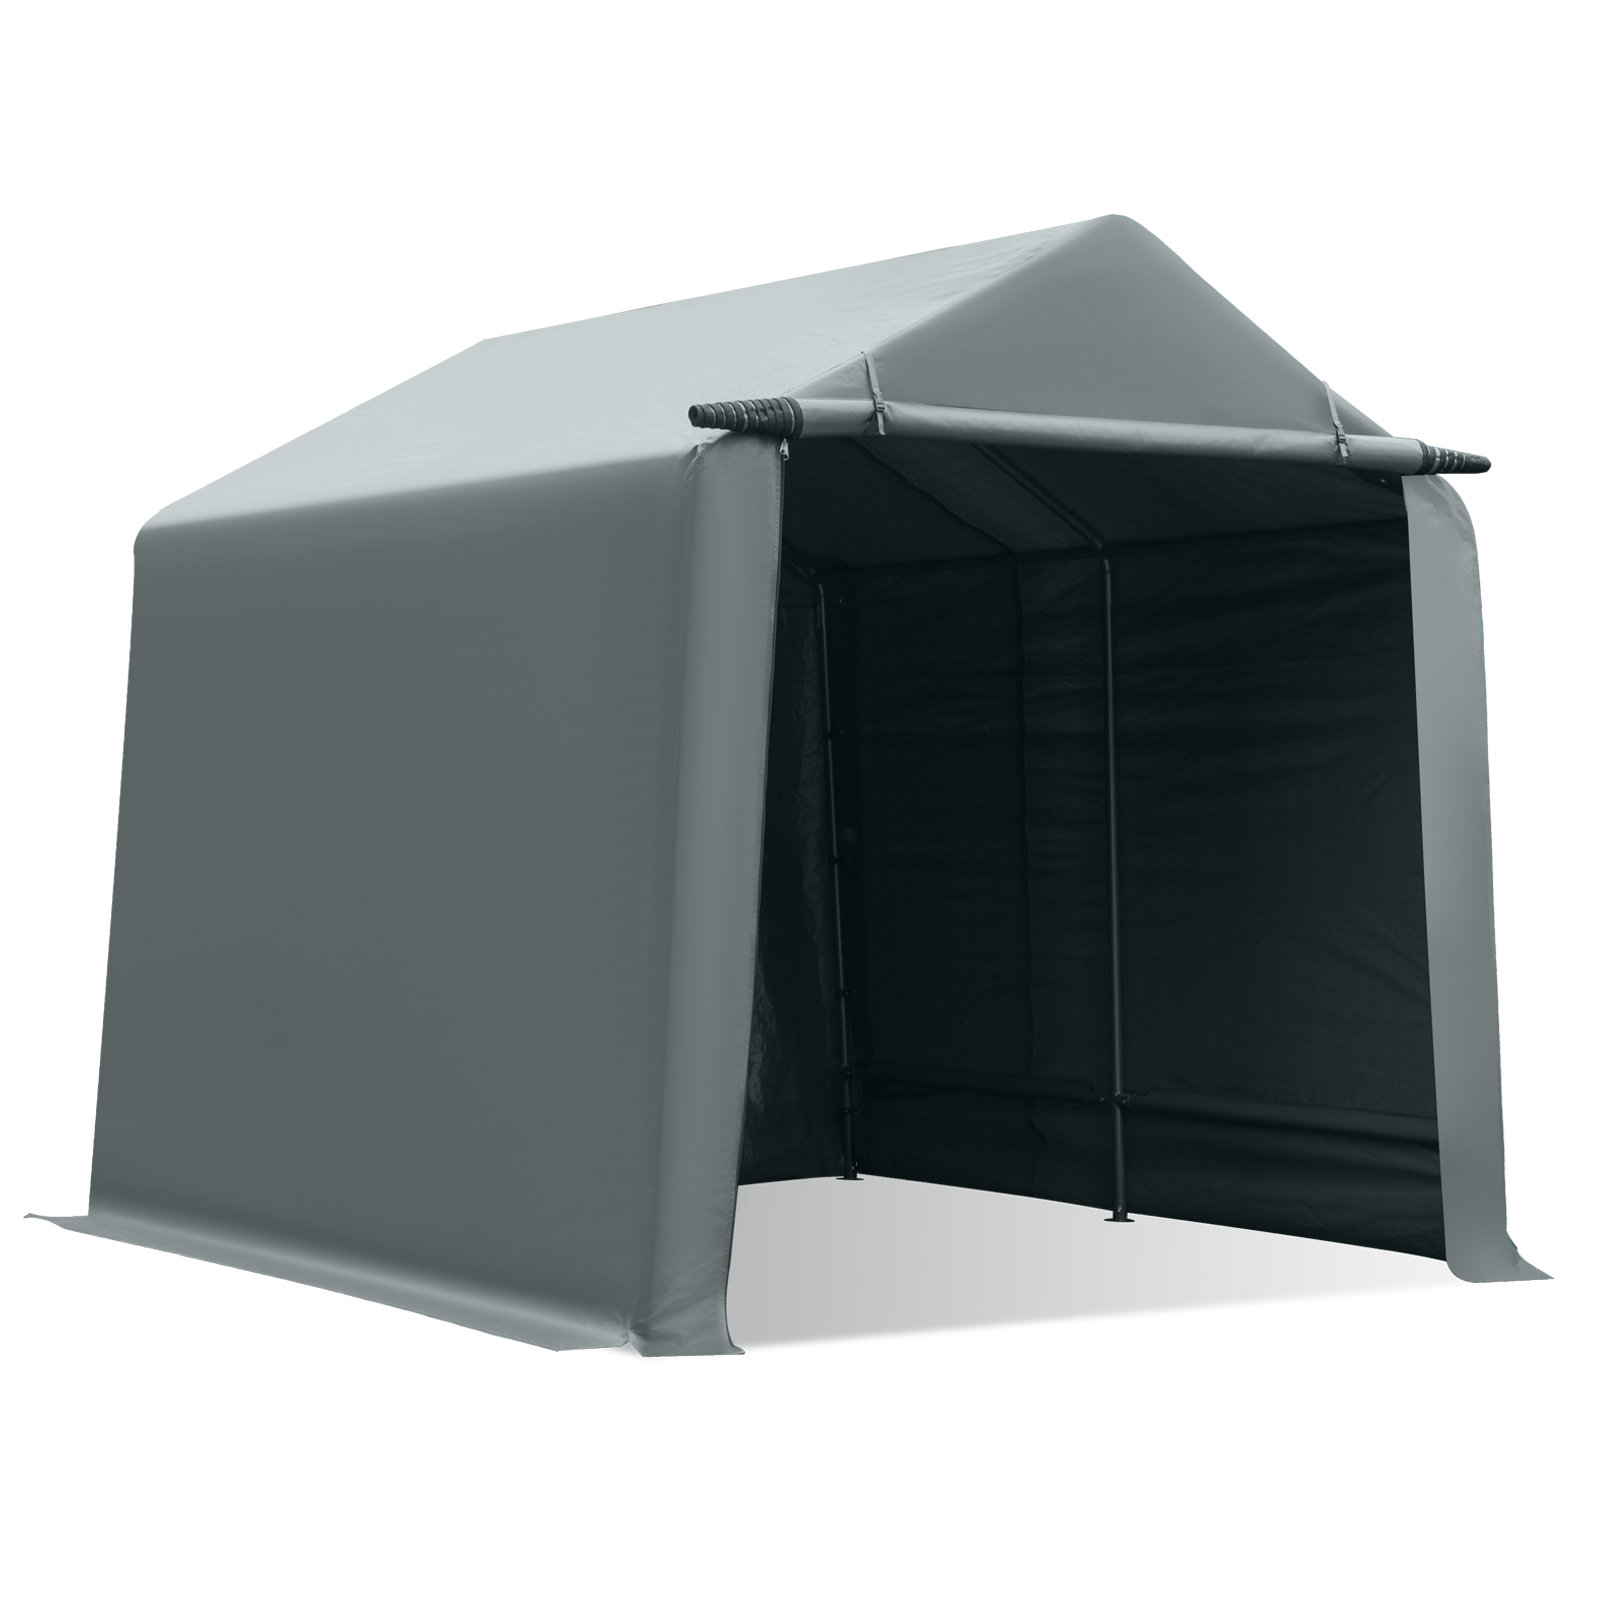 Gardesol Storage Shelter, 10X10ft Portable Storage Shed for Motorcycle ...